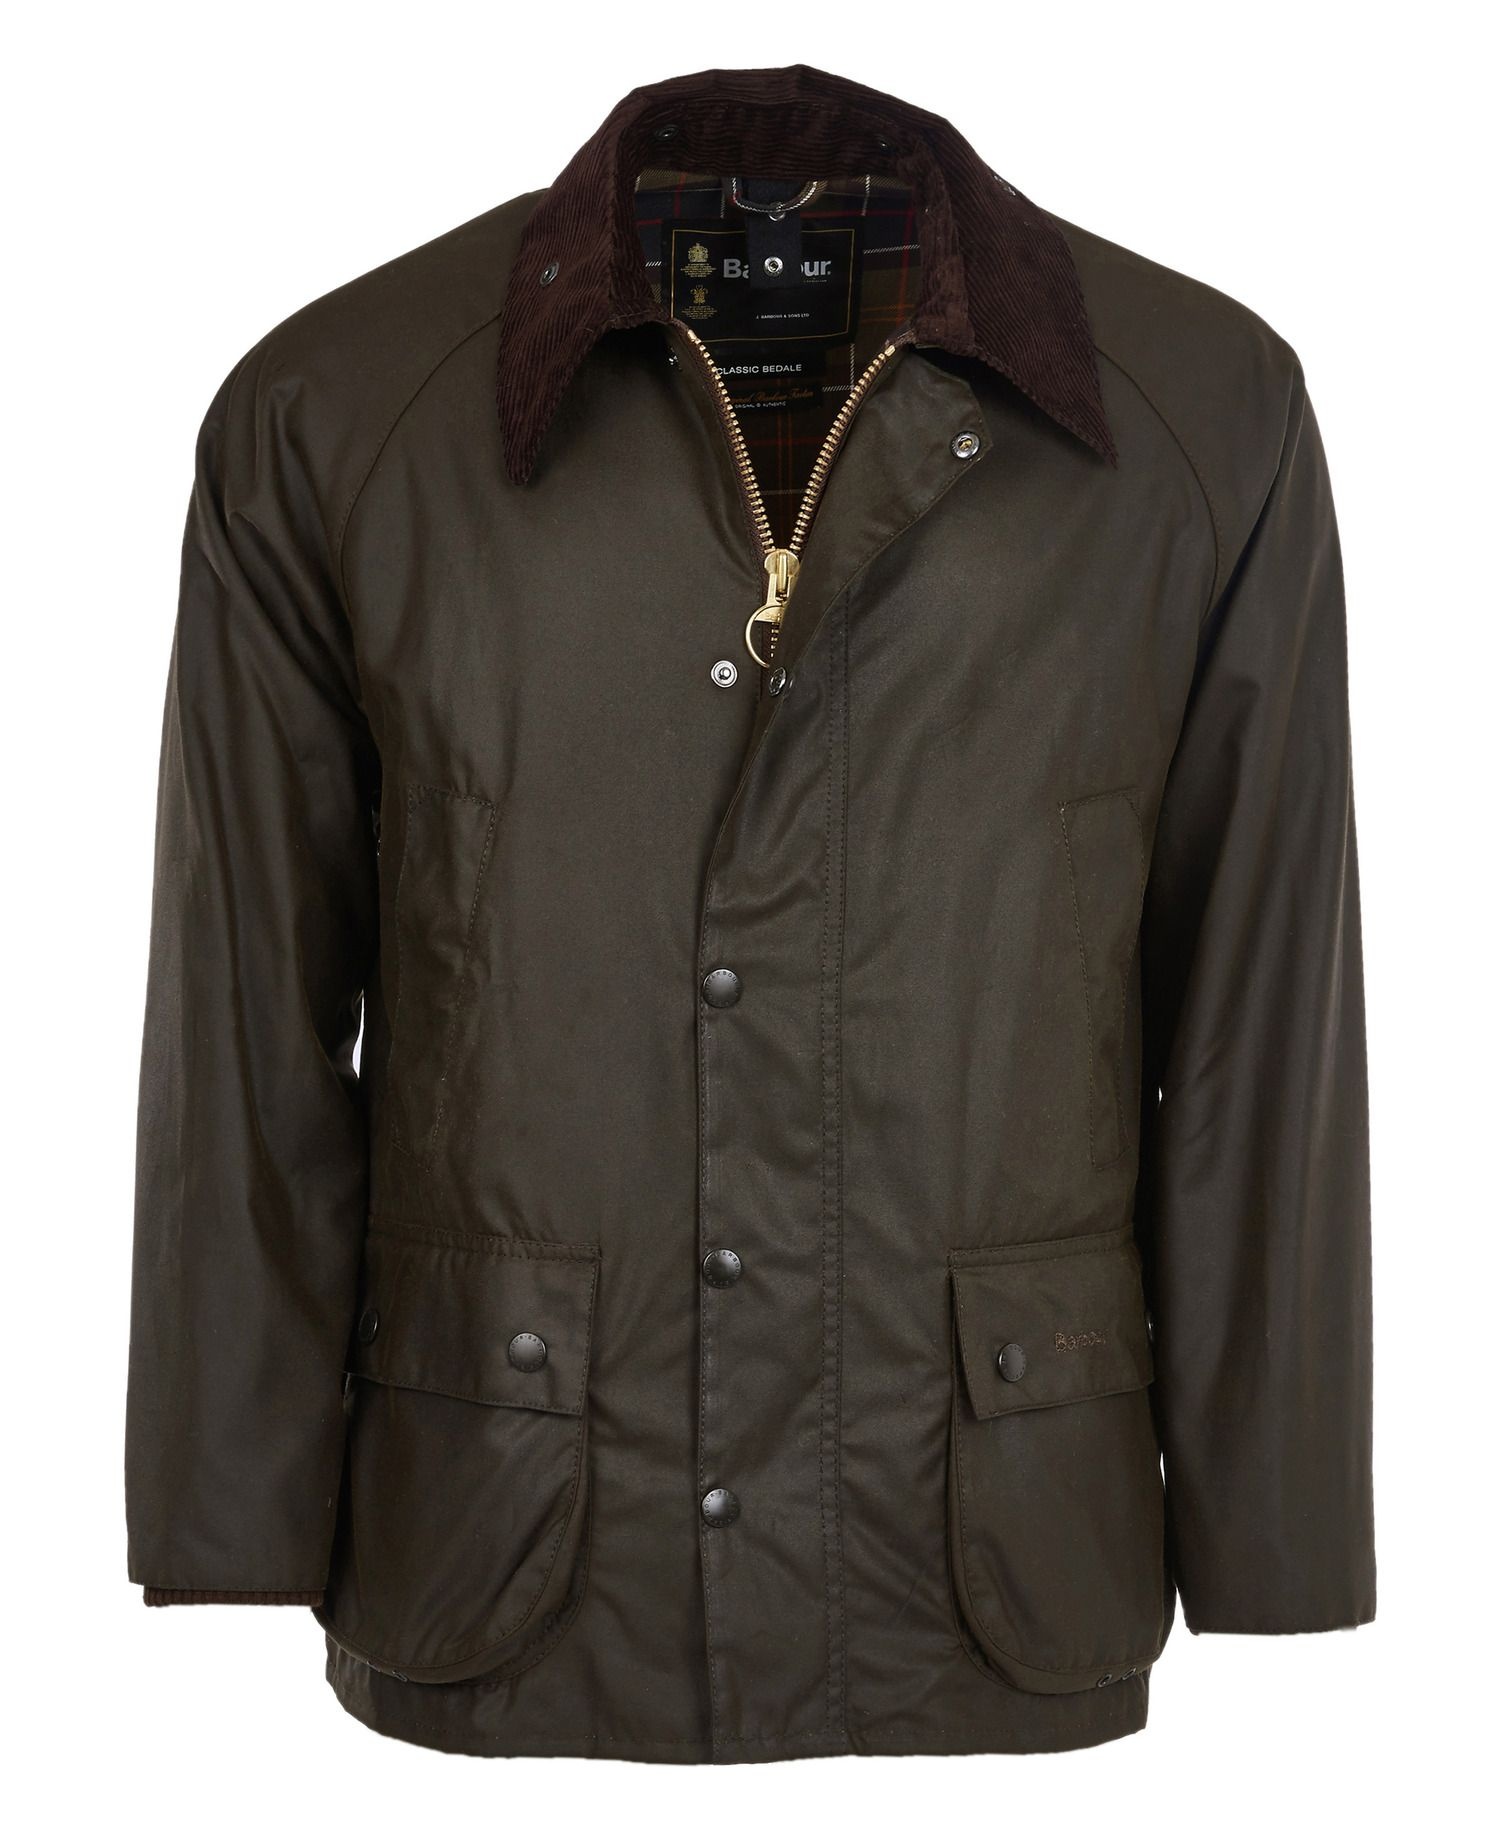 Barbour M's Classic Bedale Wax Jacket